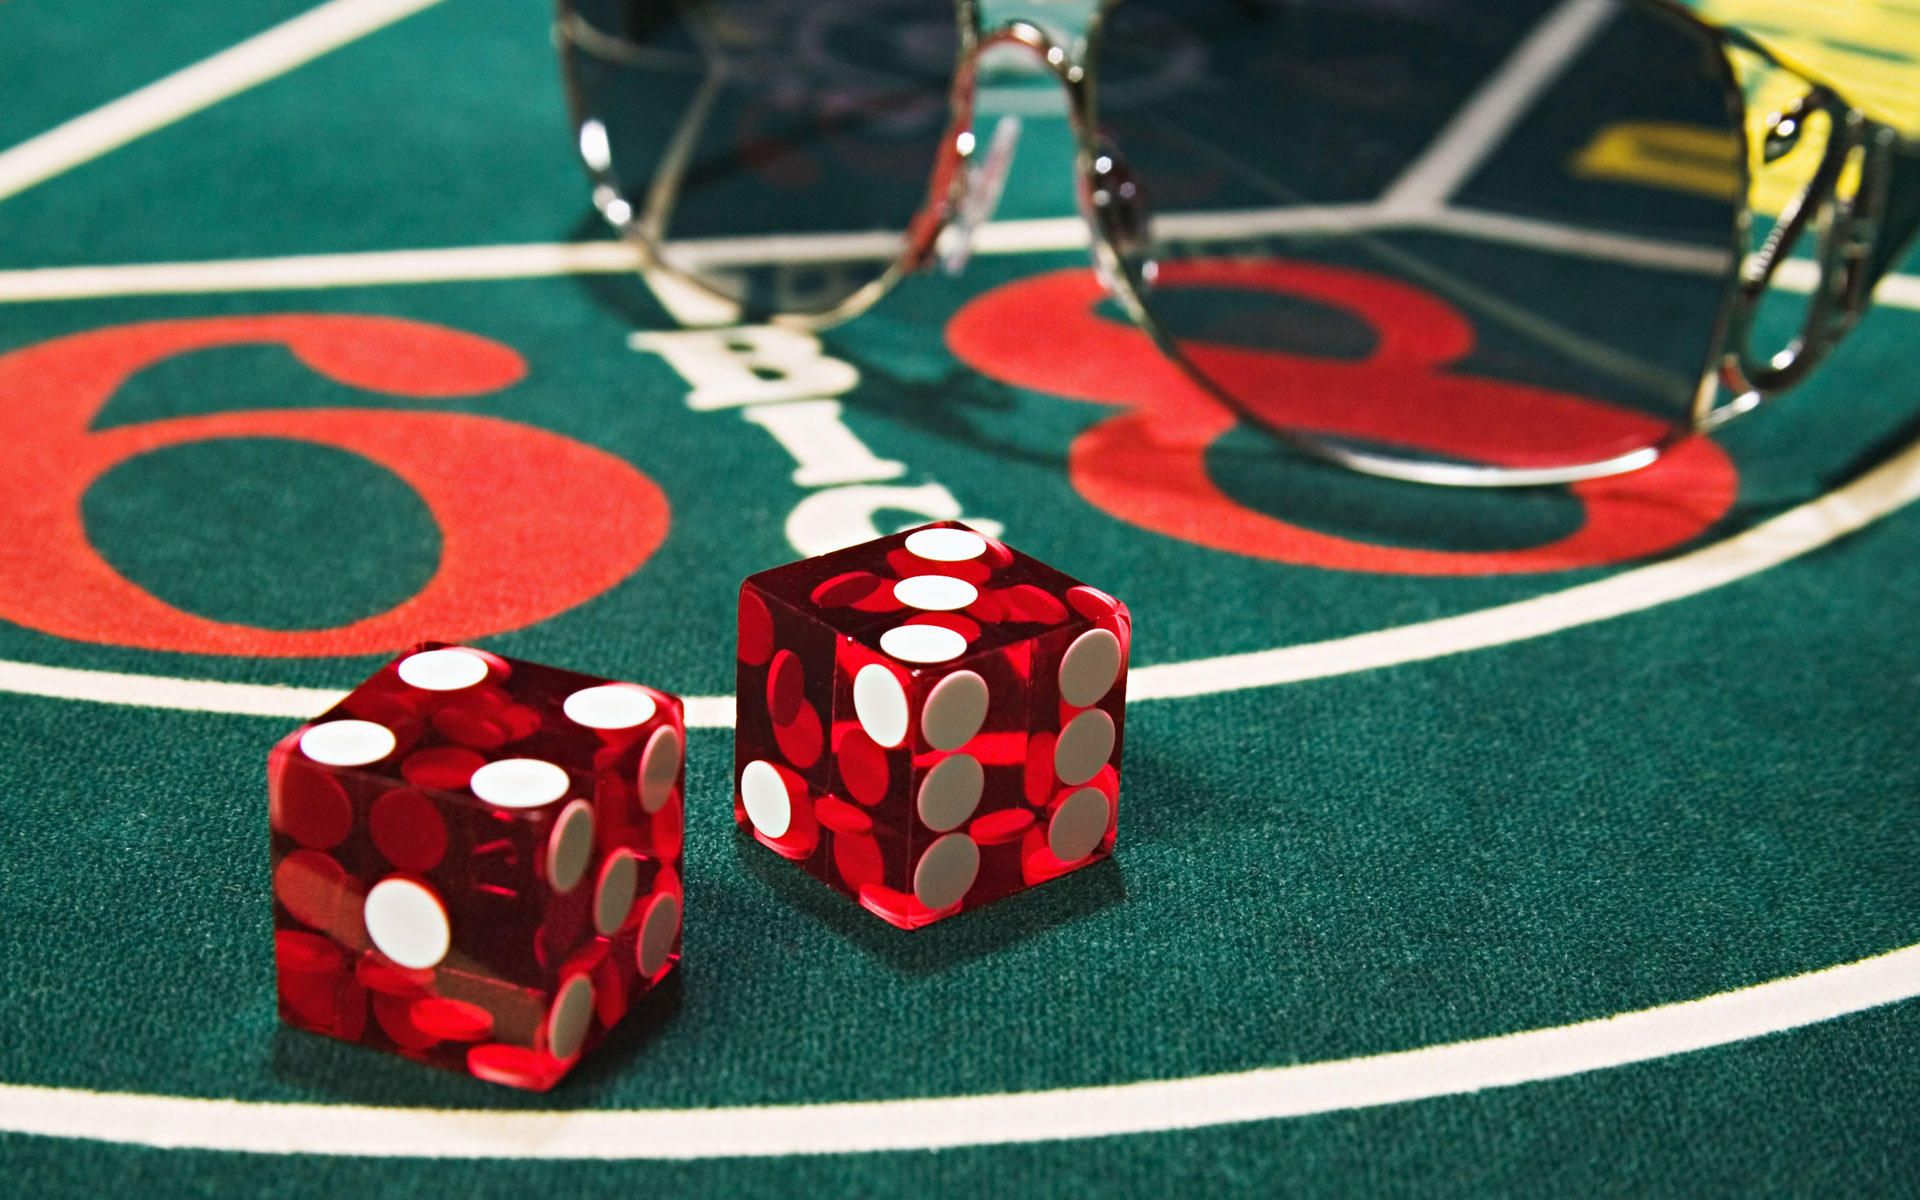 Tips on How to Play Casino Games Well